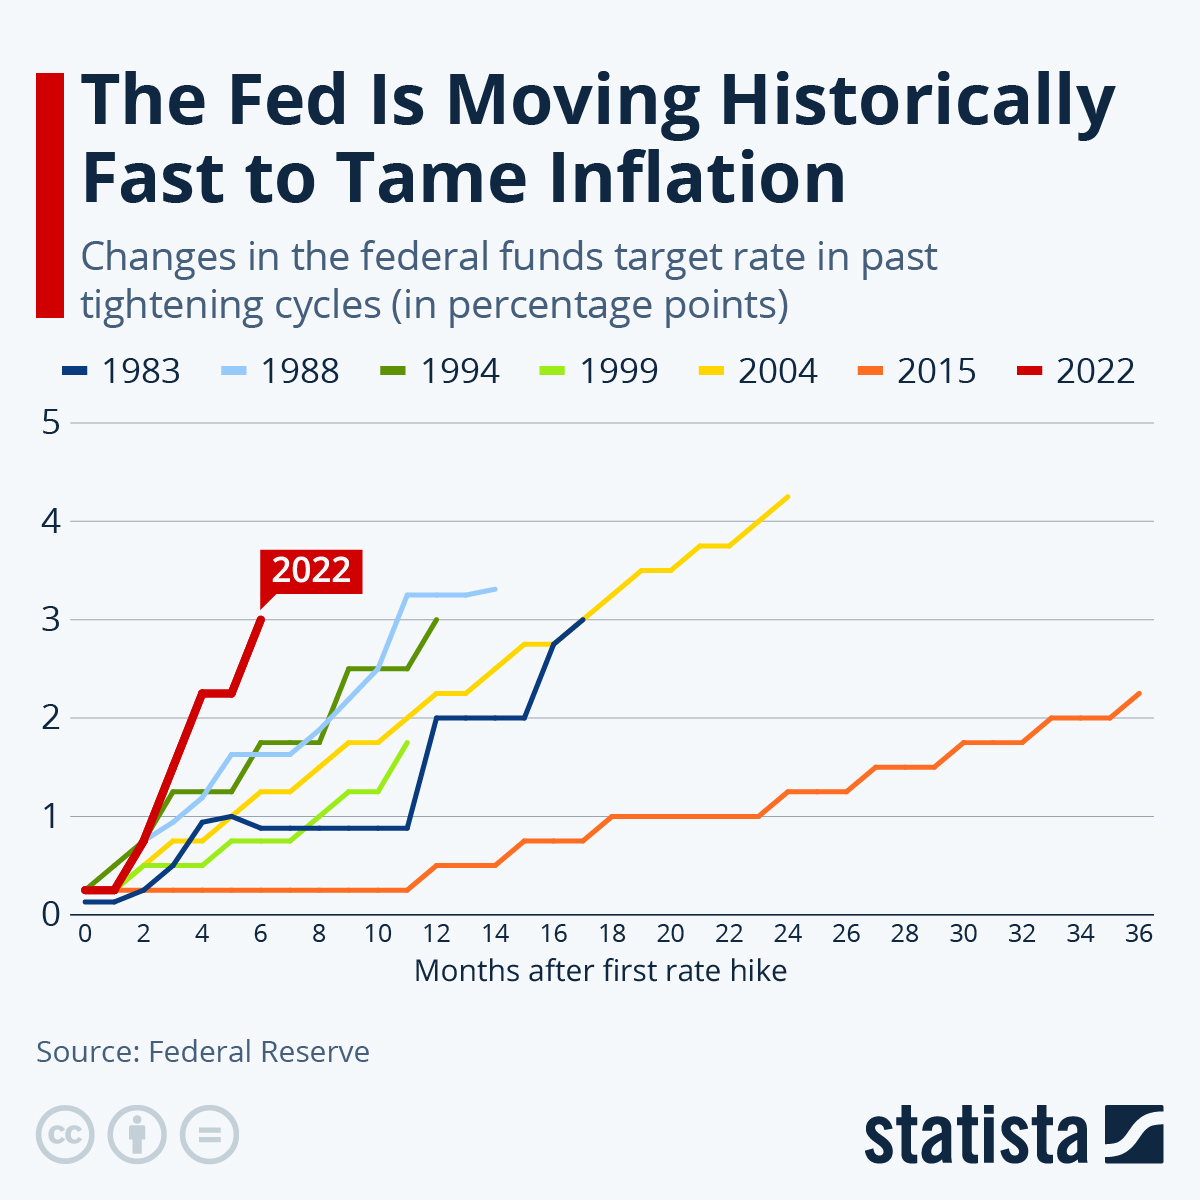 The Fed Is Moving Historically Fast to Tame Inflation